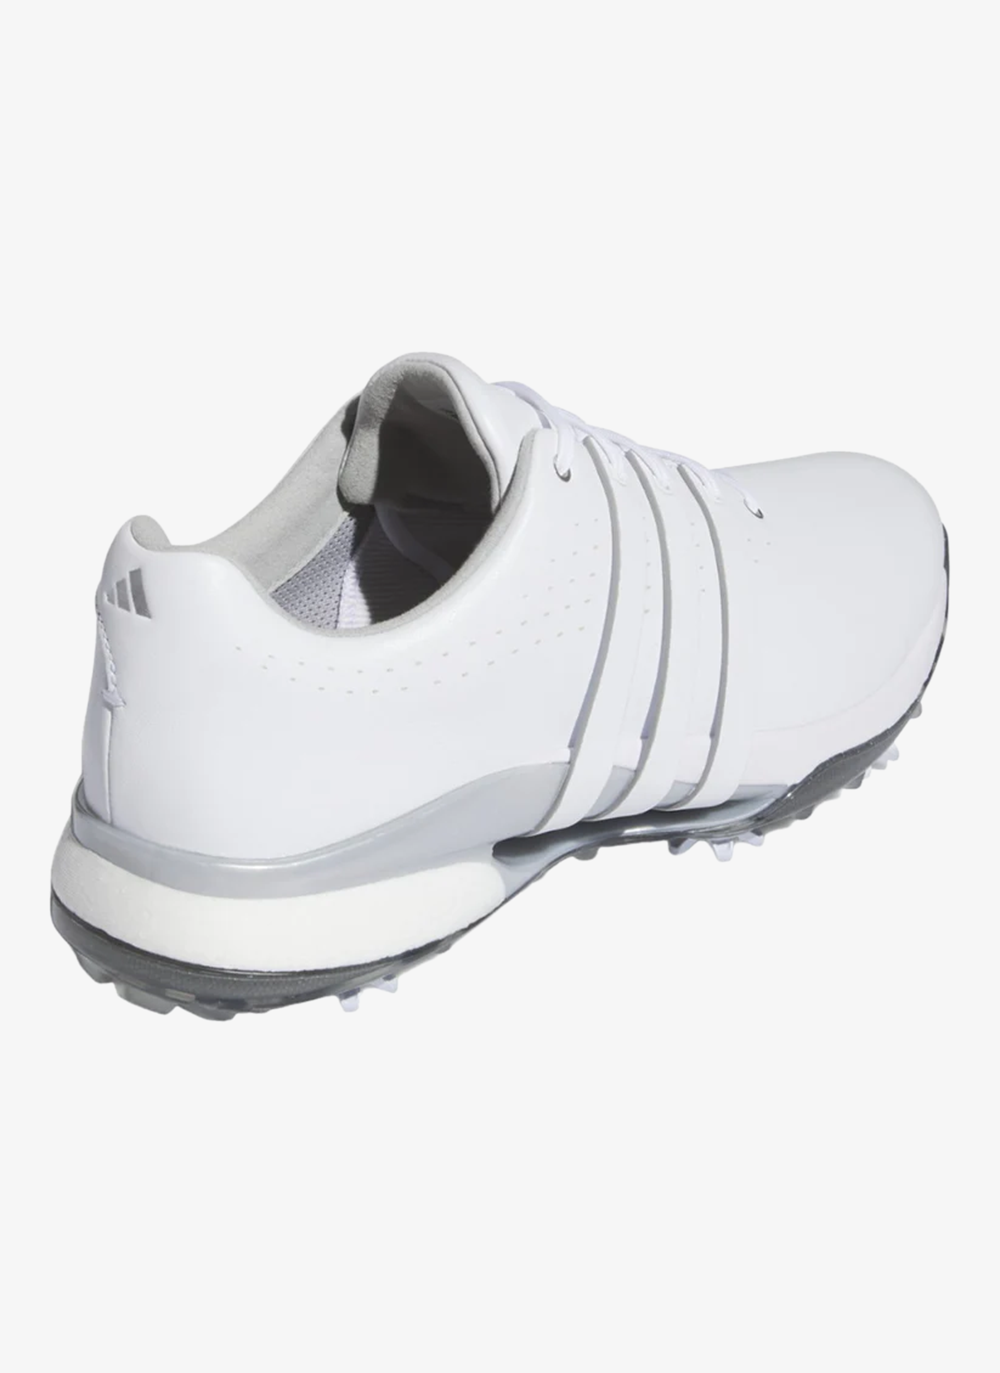 adidas Tour360 24 Golf Shoes IF0244